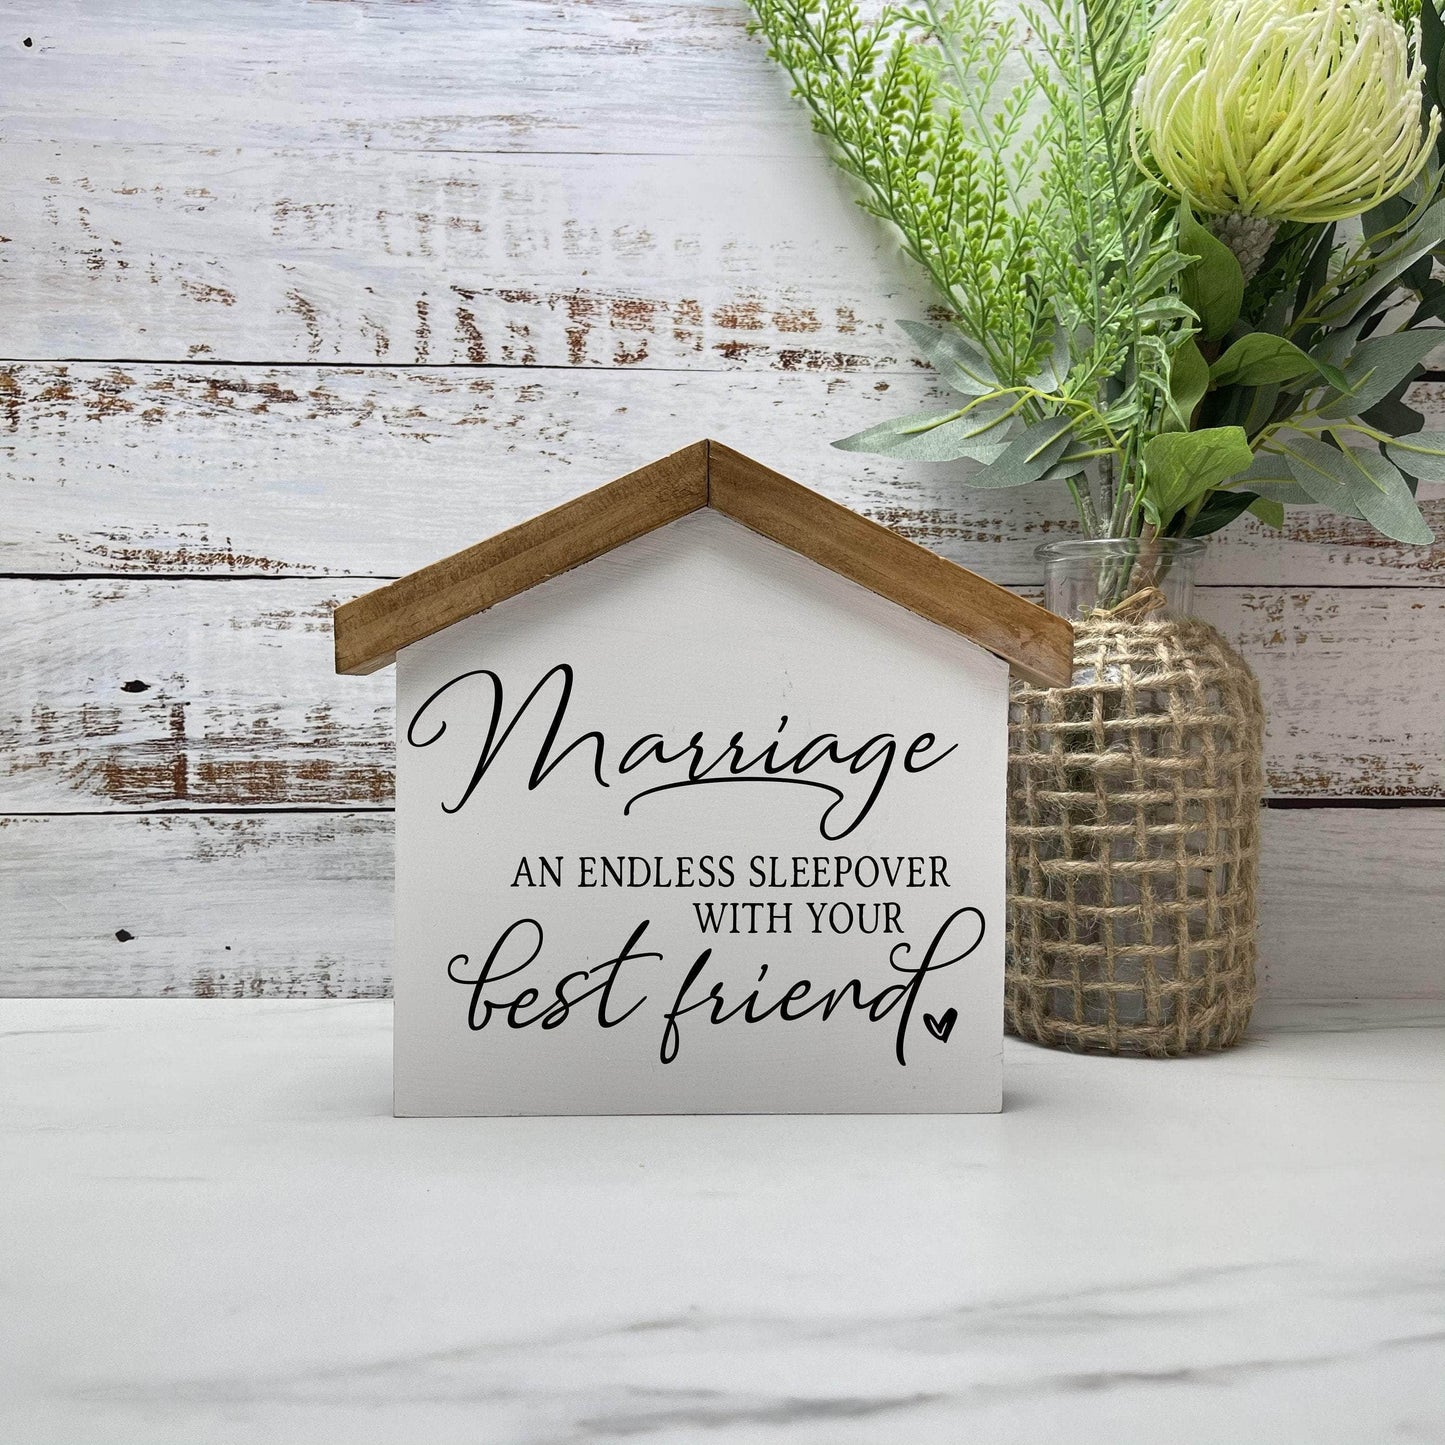 CarrouselCollectives Marriage, an endless sleep over house wood sign decor House Shaped Signs